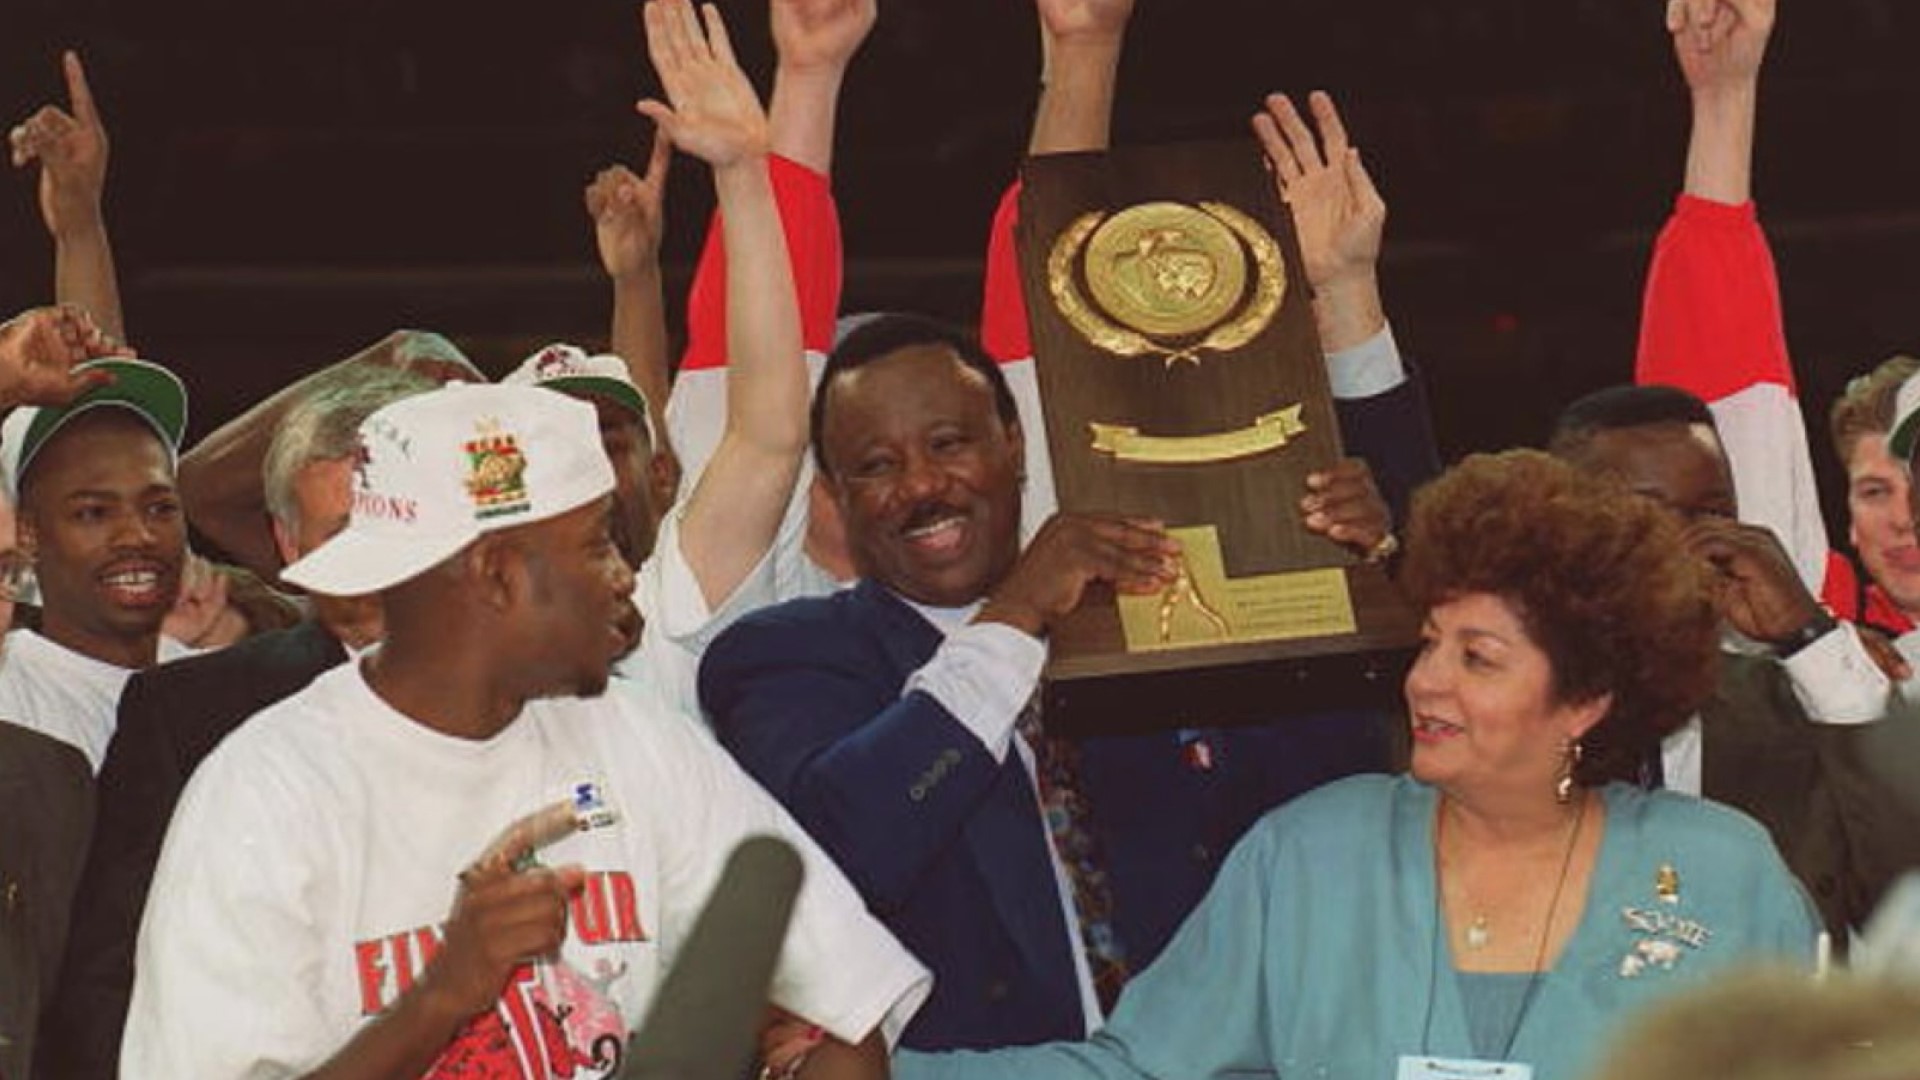 In an epic 1994 game, legendary coach Nolan Richardson led the Razorbacks to a win in the NCAA Tournament. He says he's cheering them on tonight in the Sweet 16!